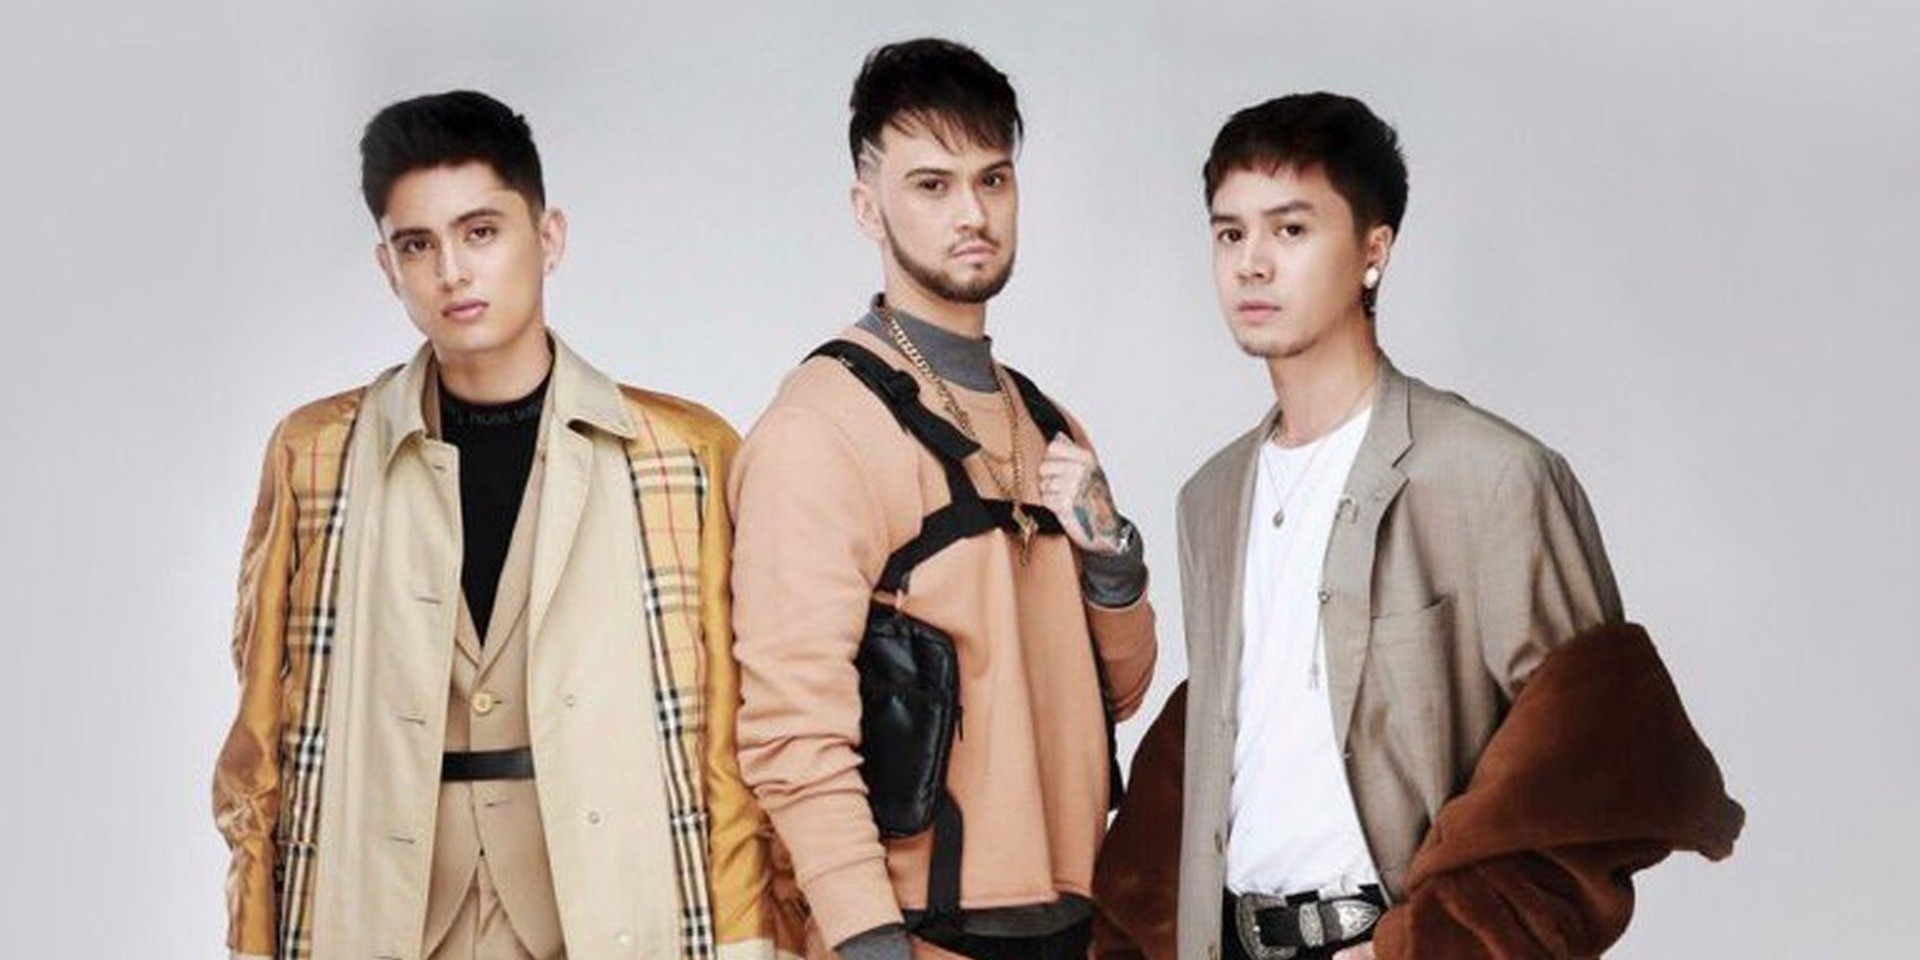 James Reid, Sam Concepcion, and Billy Crawford to perform in concert this April